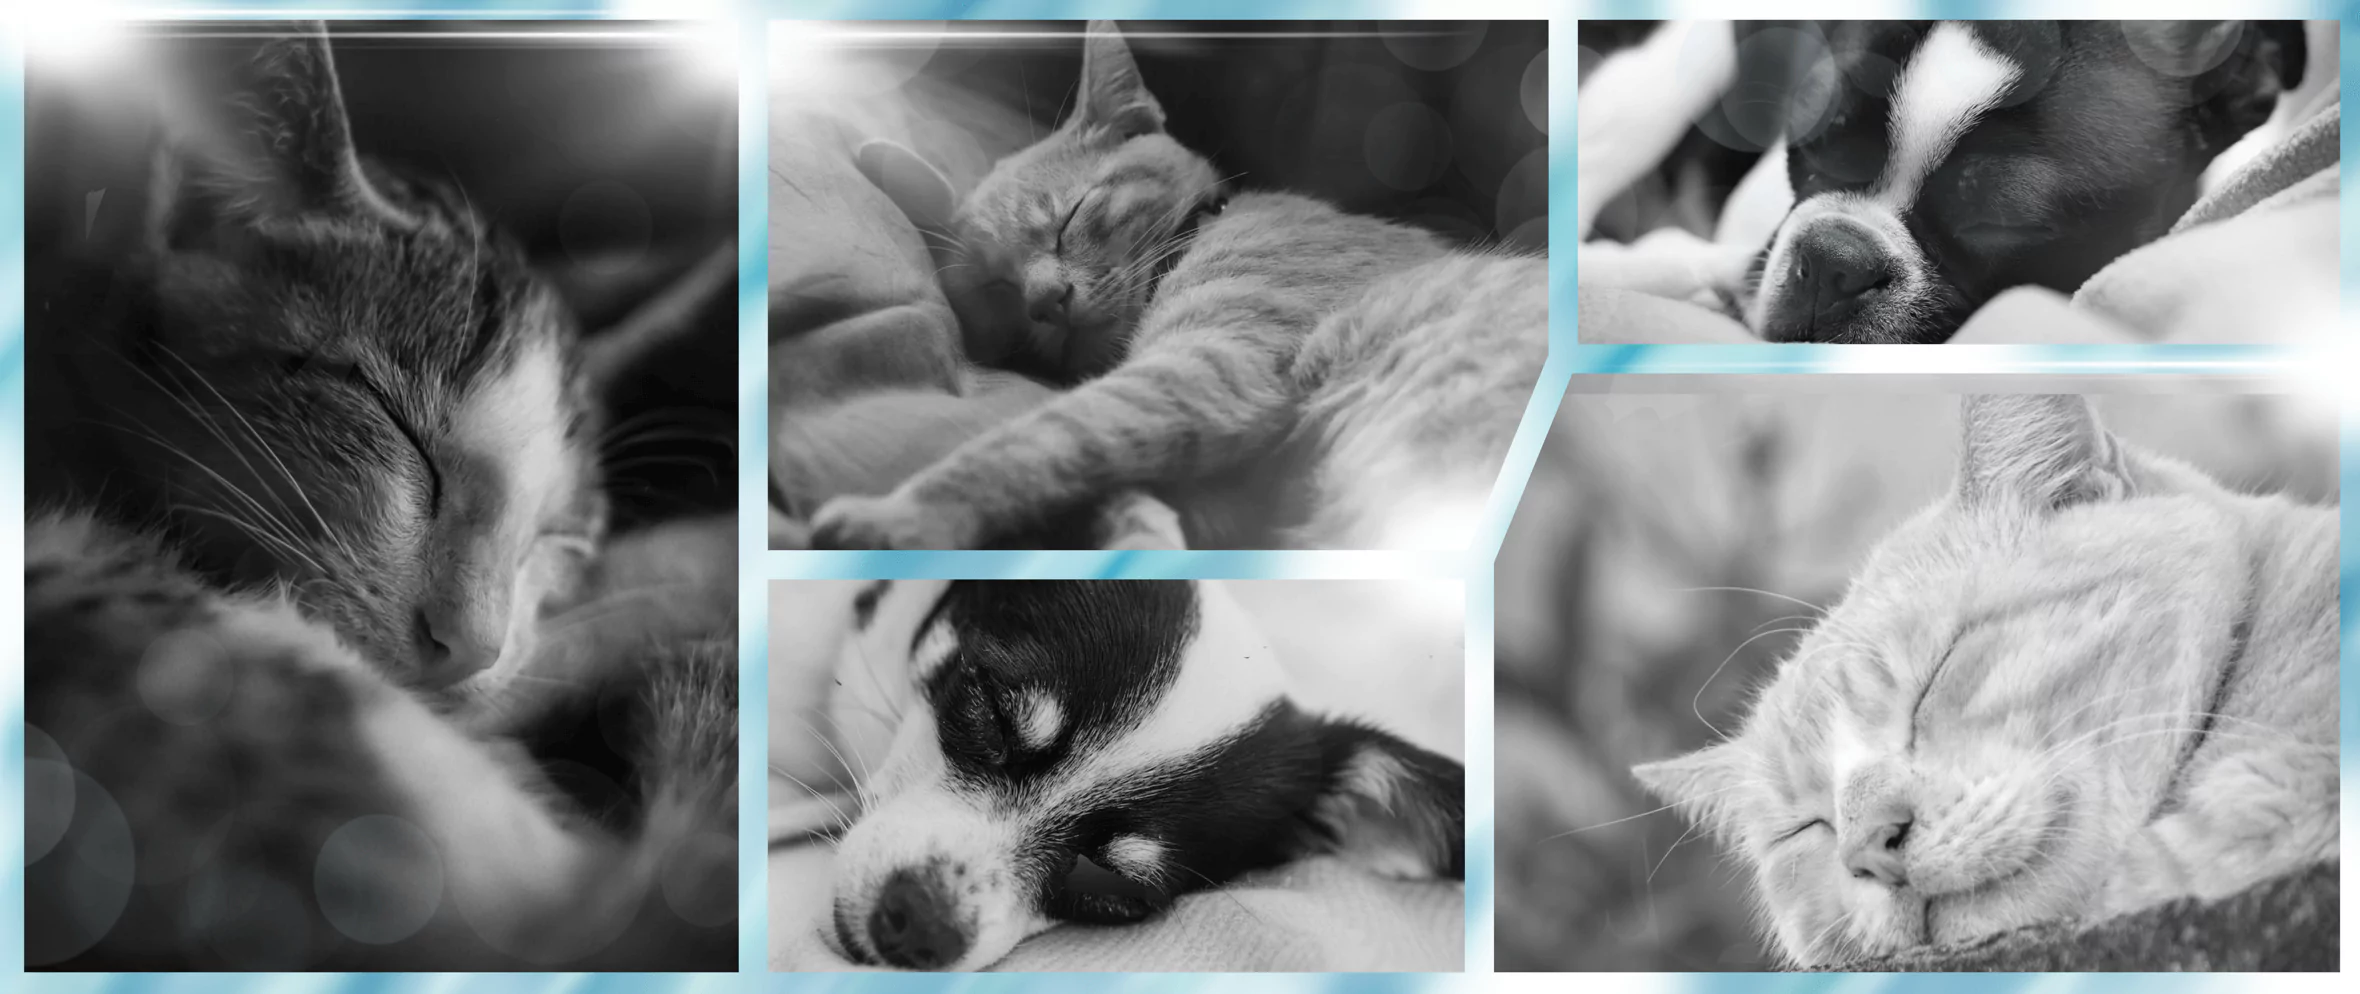 Black and white collage of cats and dogs for HolisticalVets' in-home pet euthanasia services in Monmouth County, New Jersey (available in towns near you in 07701, 07702, 07703, 07704, 07710, 07711, 07712, 07715, 07716, 07717, 07718, 07719, 07720, 07721, 07722, 07723, 07724, 07726, 07727, 07728, 07730, 07731, 07732, 07733, 07734, 07735, 07737, 07738, 07739, 07740, 07746, 07747, 07748, 07750, 07751, 07752, 07753, 07754, 07755, 07756, 07757, 07758, 07760, 07762, 07763, 07764, 07765, 07799, 08501, 08510, 08514, 08526, 08535, 08555, 08720, 08730, 08736, and 08750)